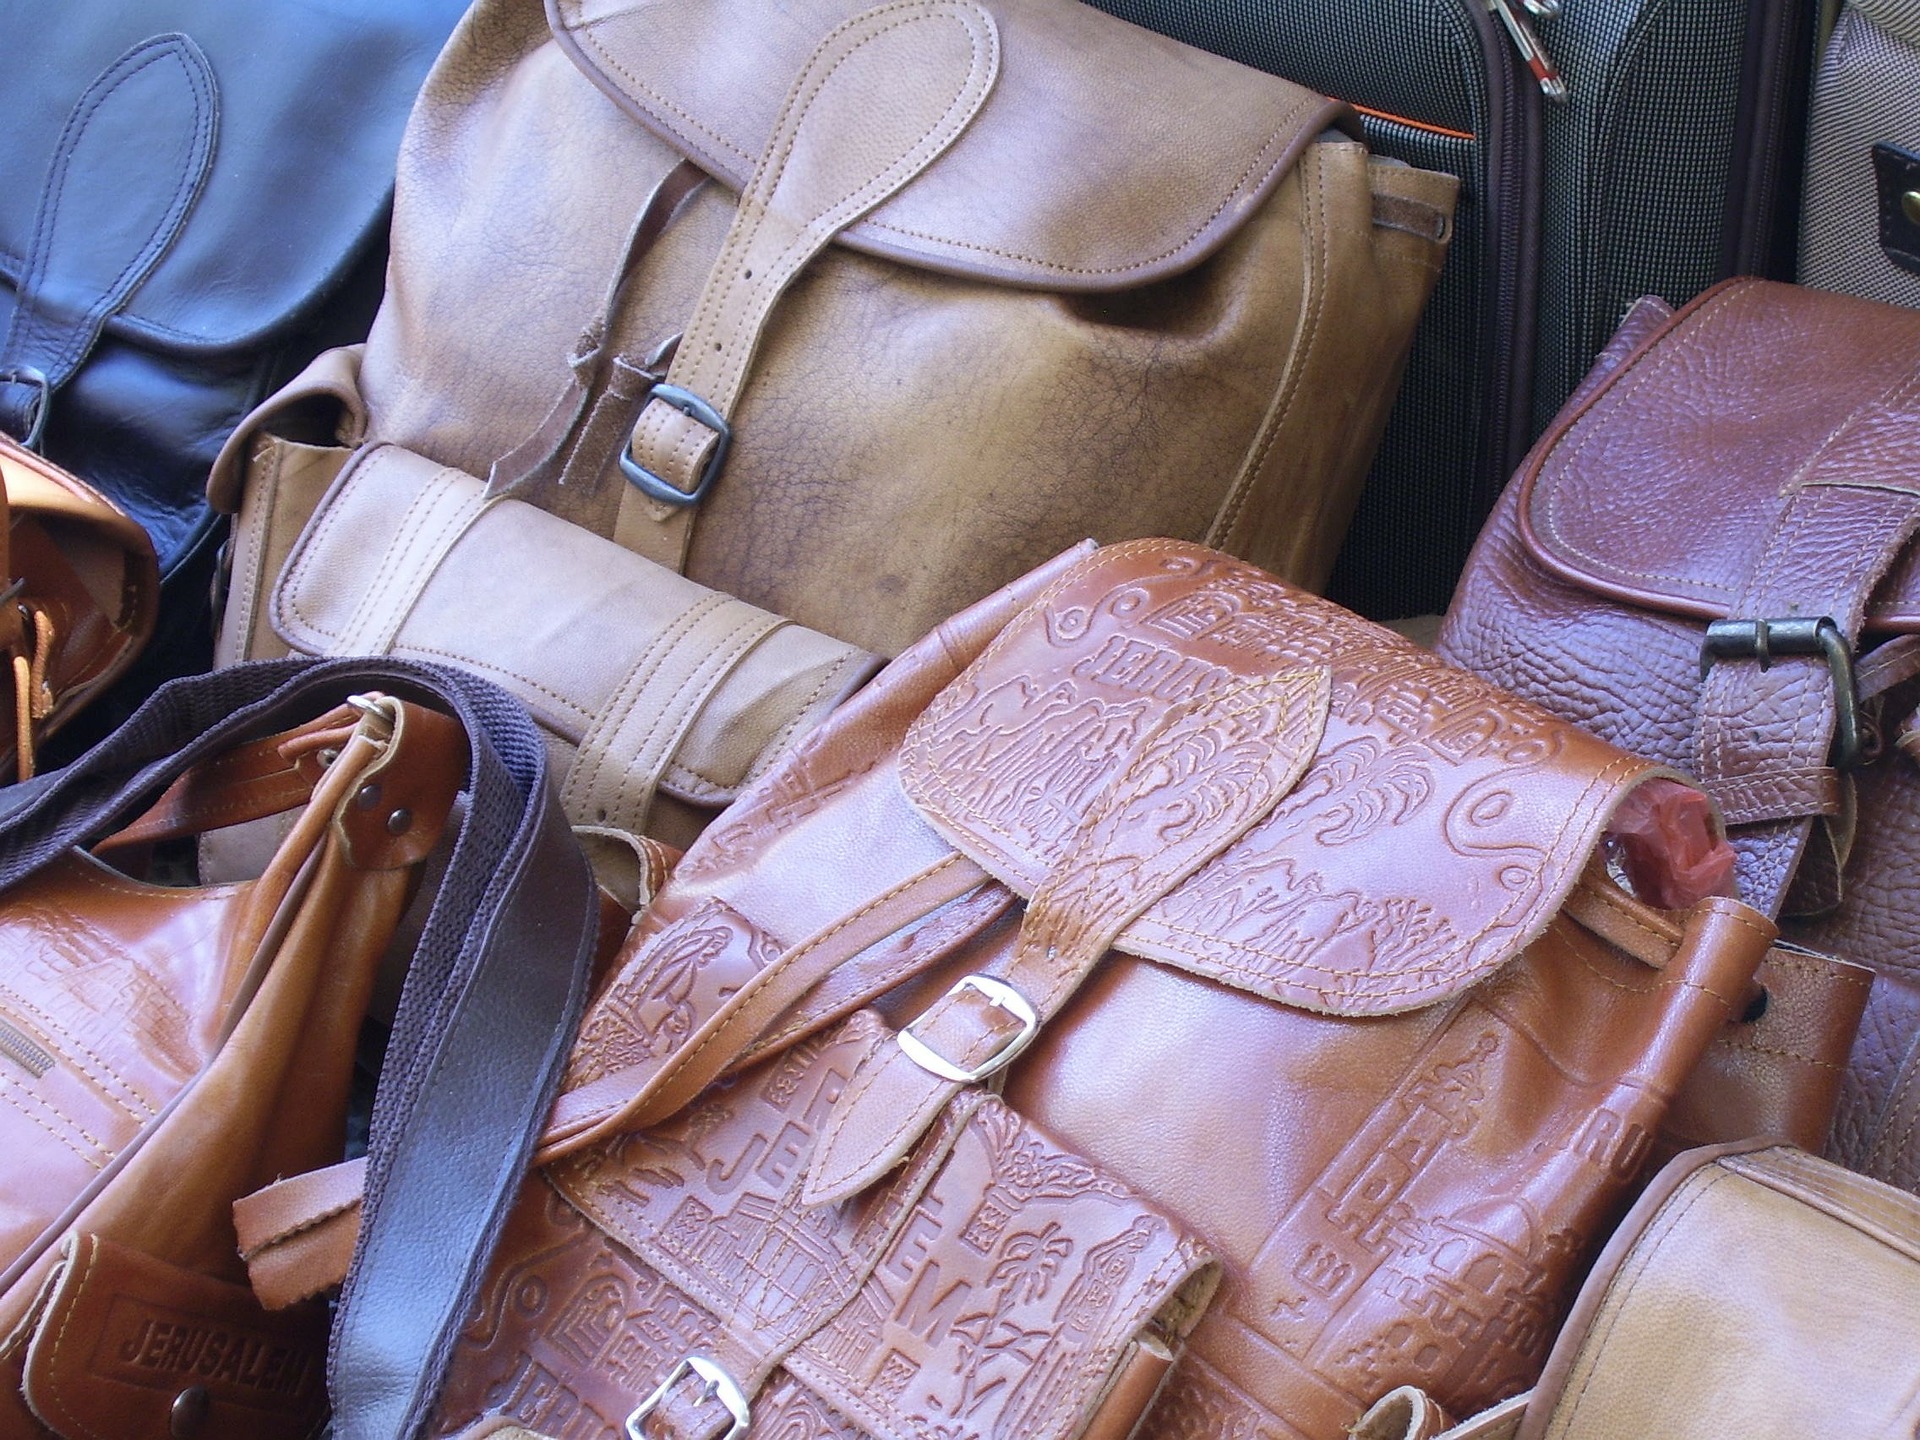 Things To Look Out For Before Buying A Leather Bag